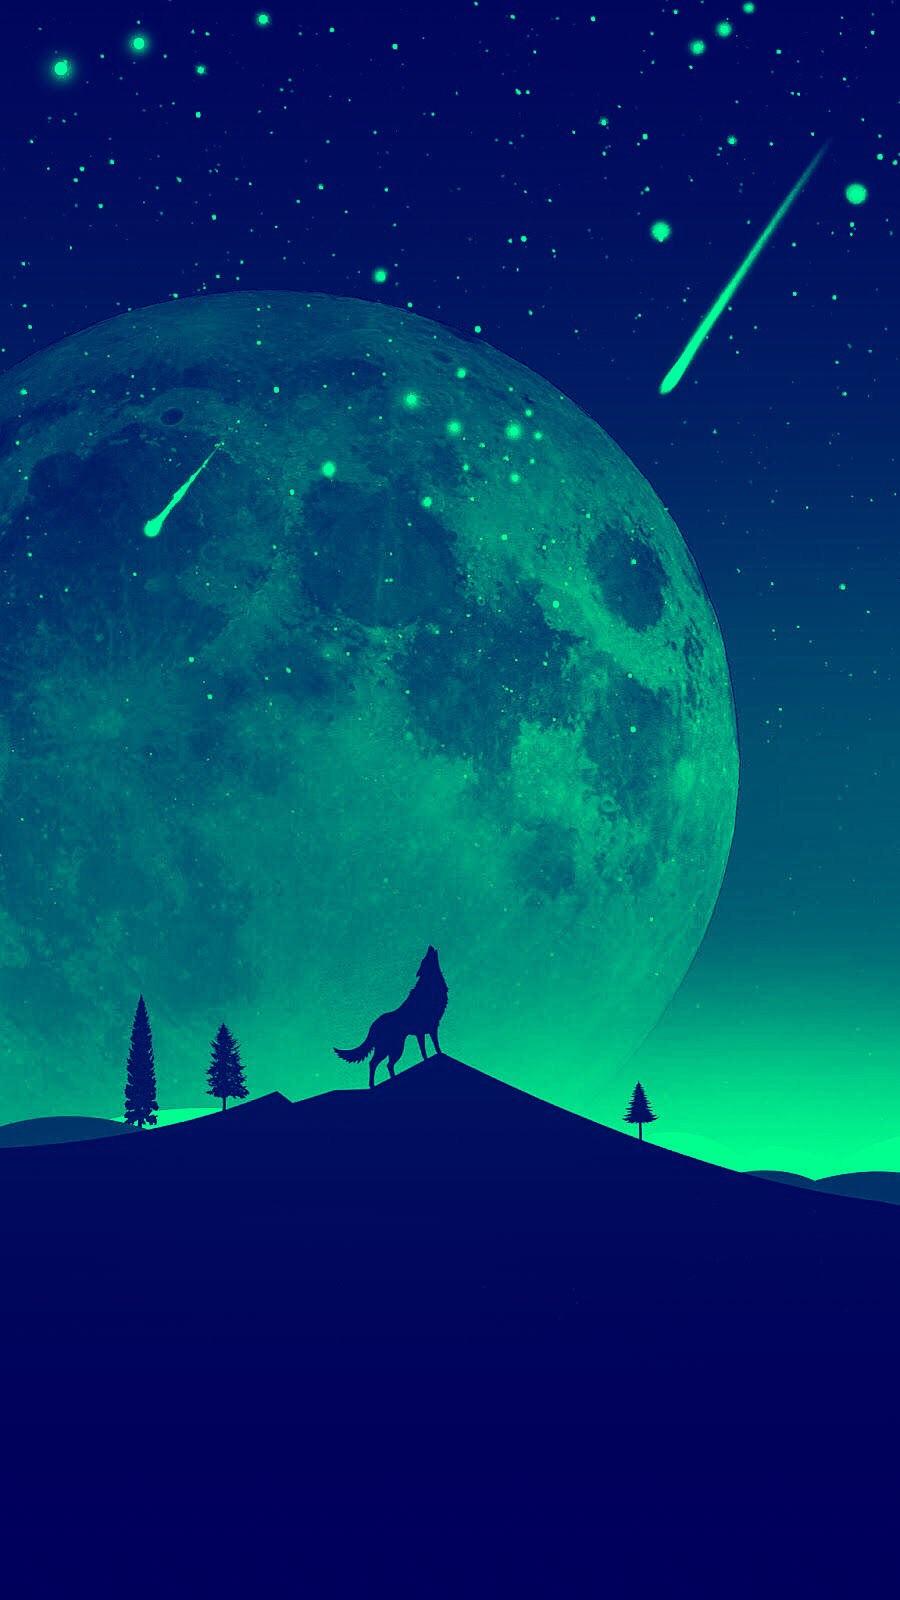 Another Dope Wallpaper For Y'all T Wolves Fans!